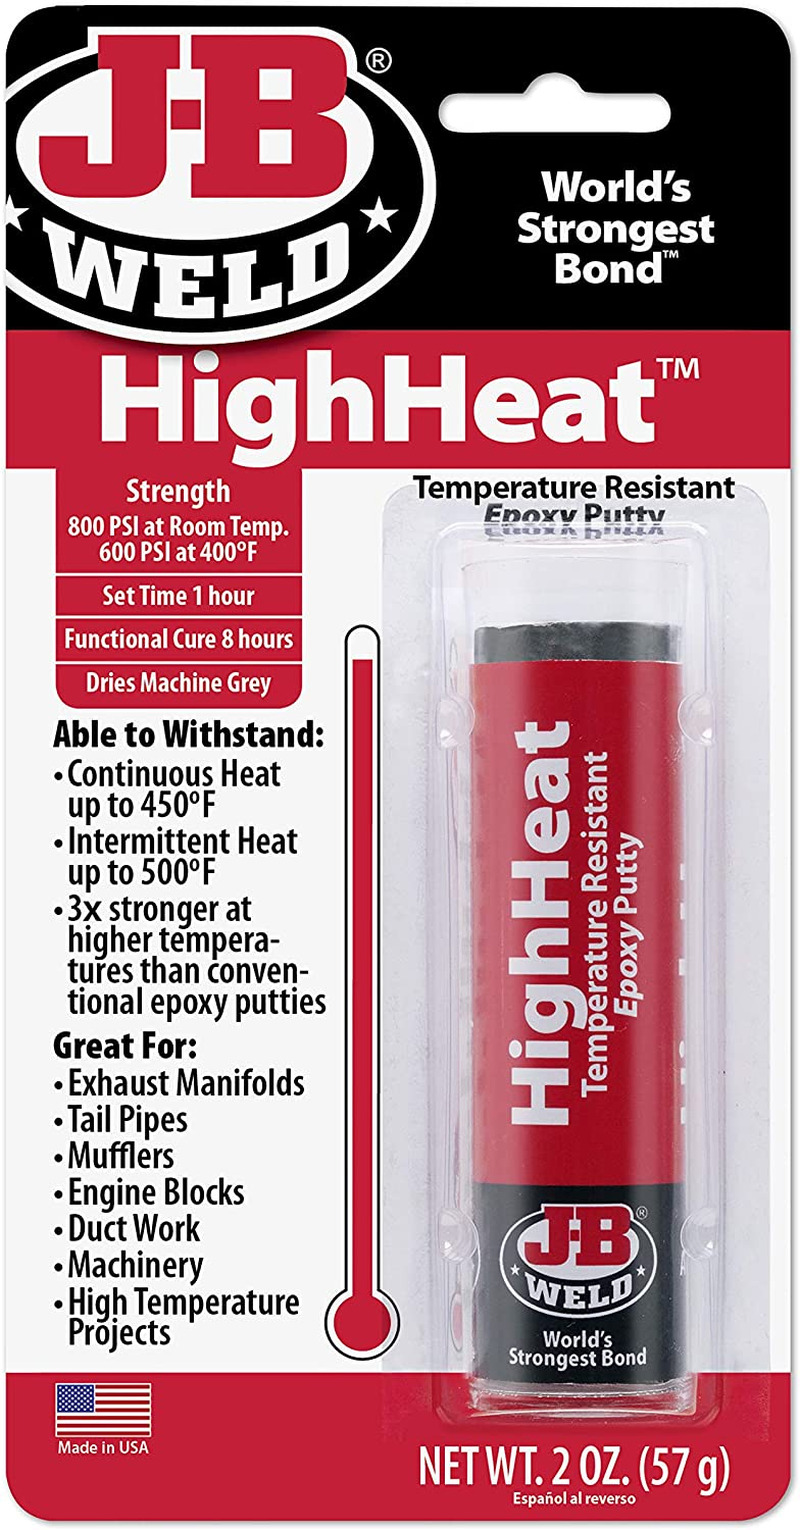 What Adhesive Can Withstand Heat